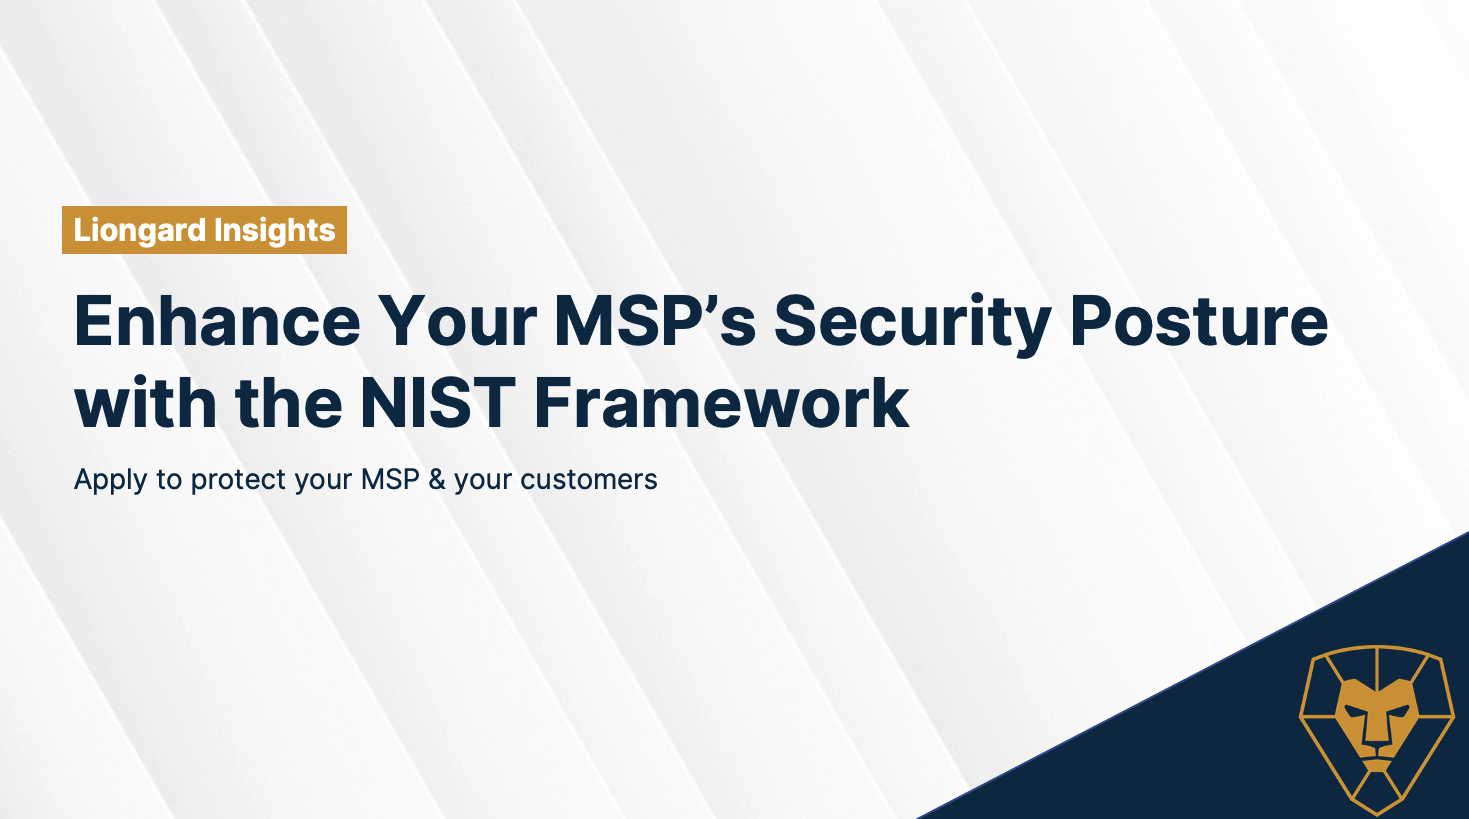 Enhance Your MSP's Security Posture with The NIST Framework